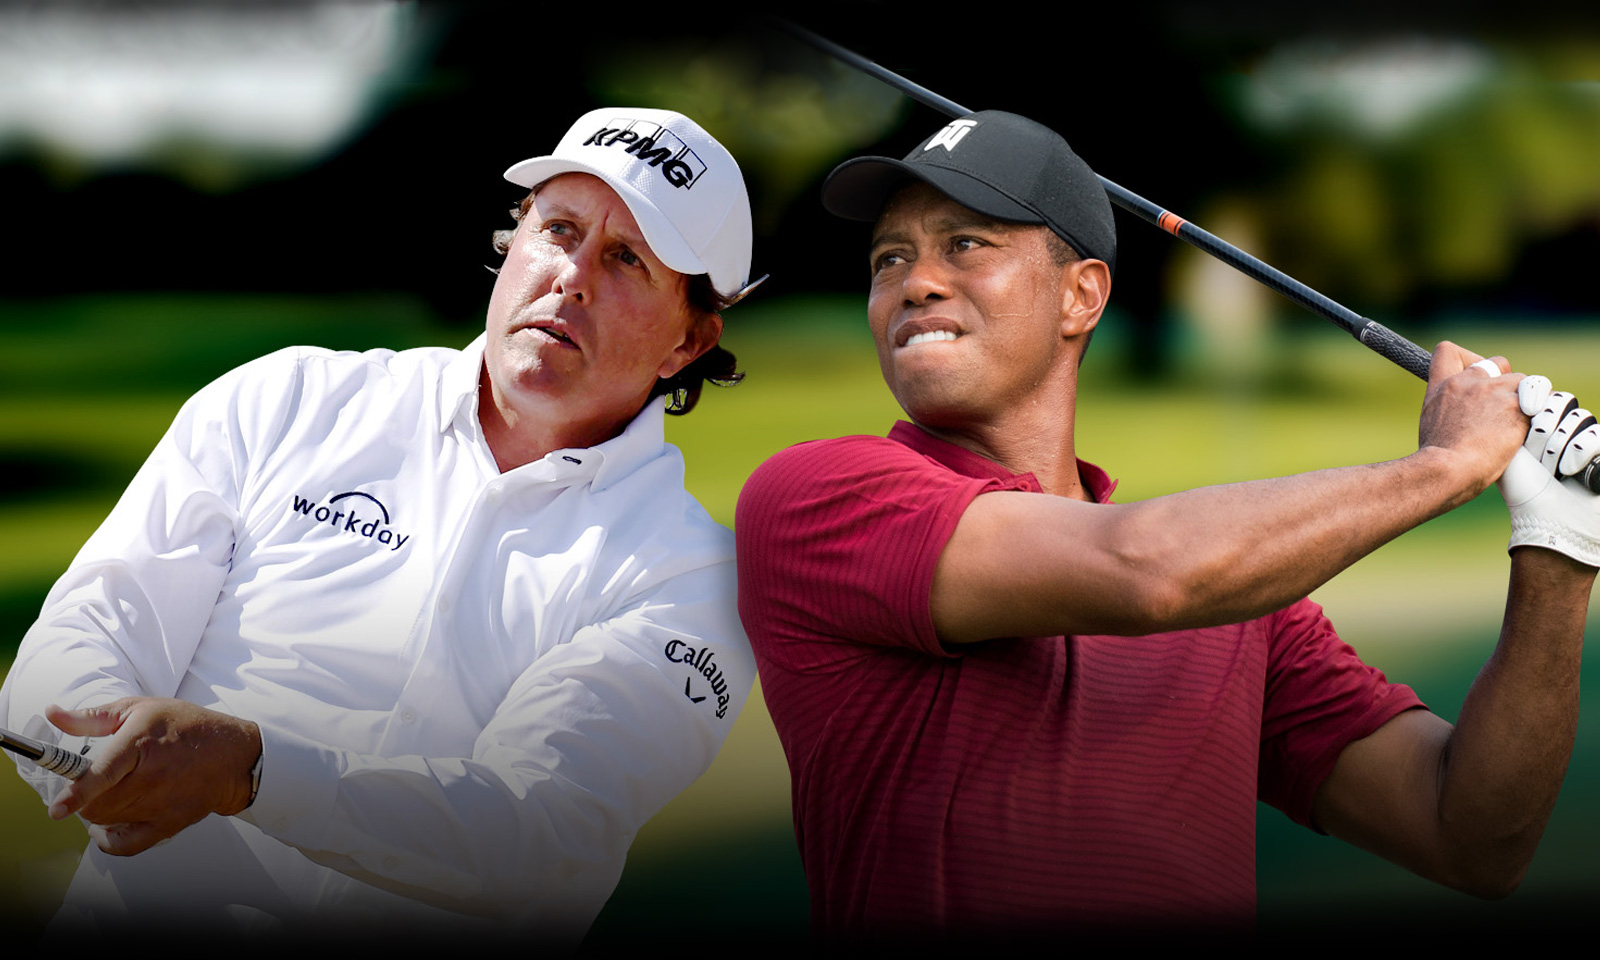 Golf legends Tiger Woods and Phil Mickelson 